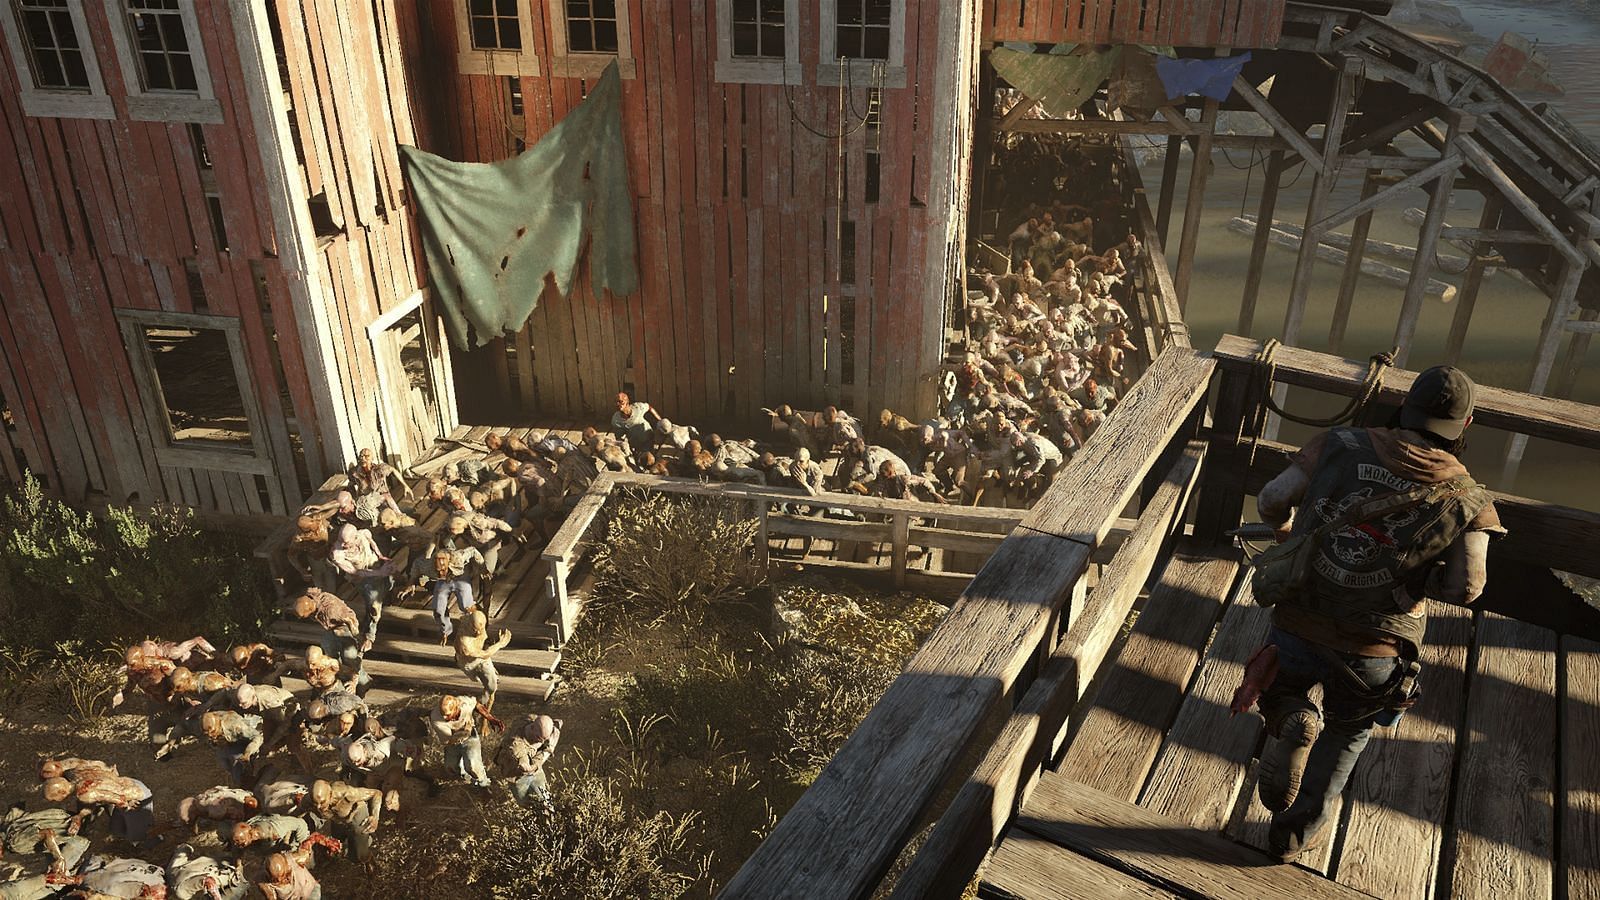 500 freakers of Sawmill (Image via Playstation)